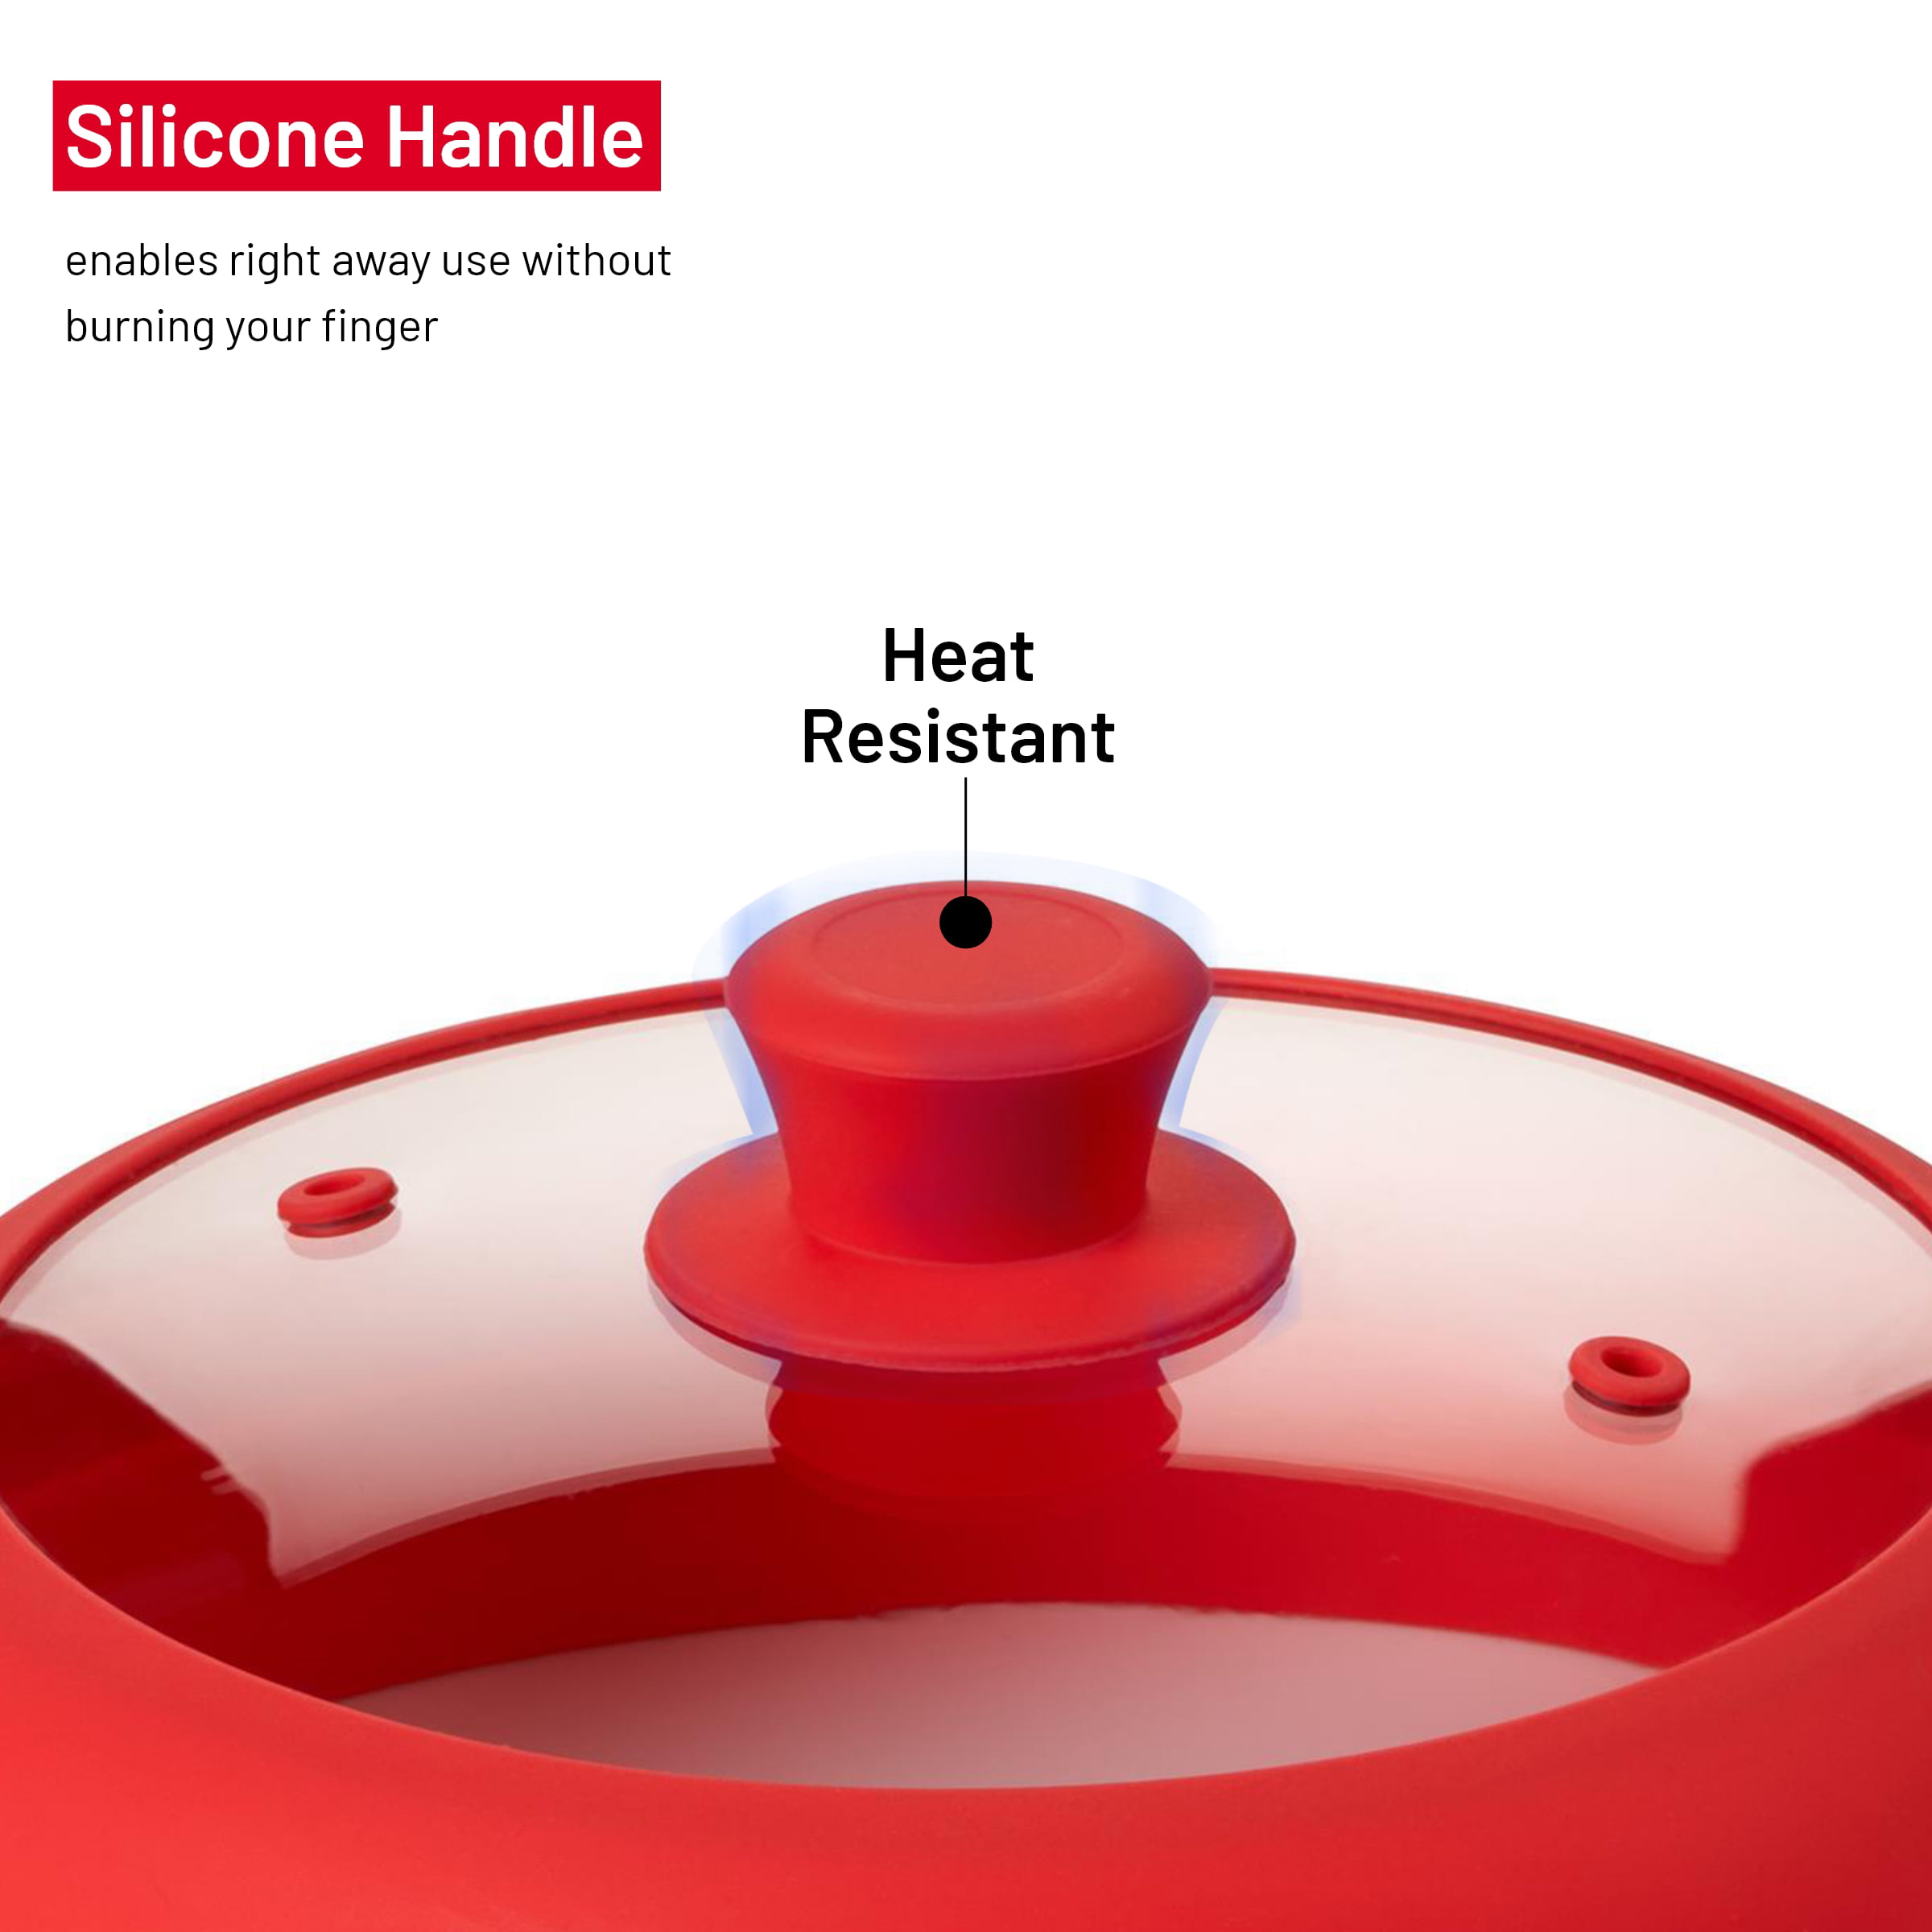 Good2Heat Microwave Plate Cover